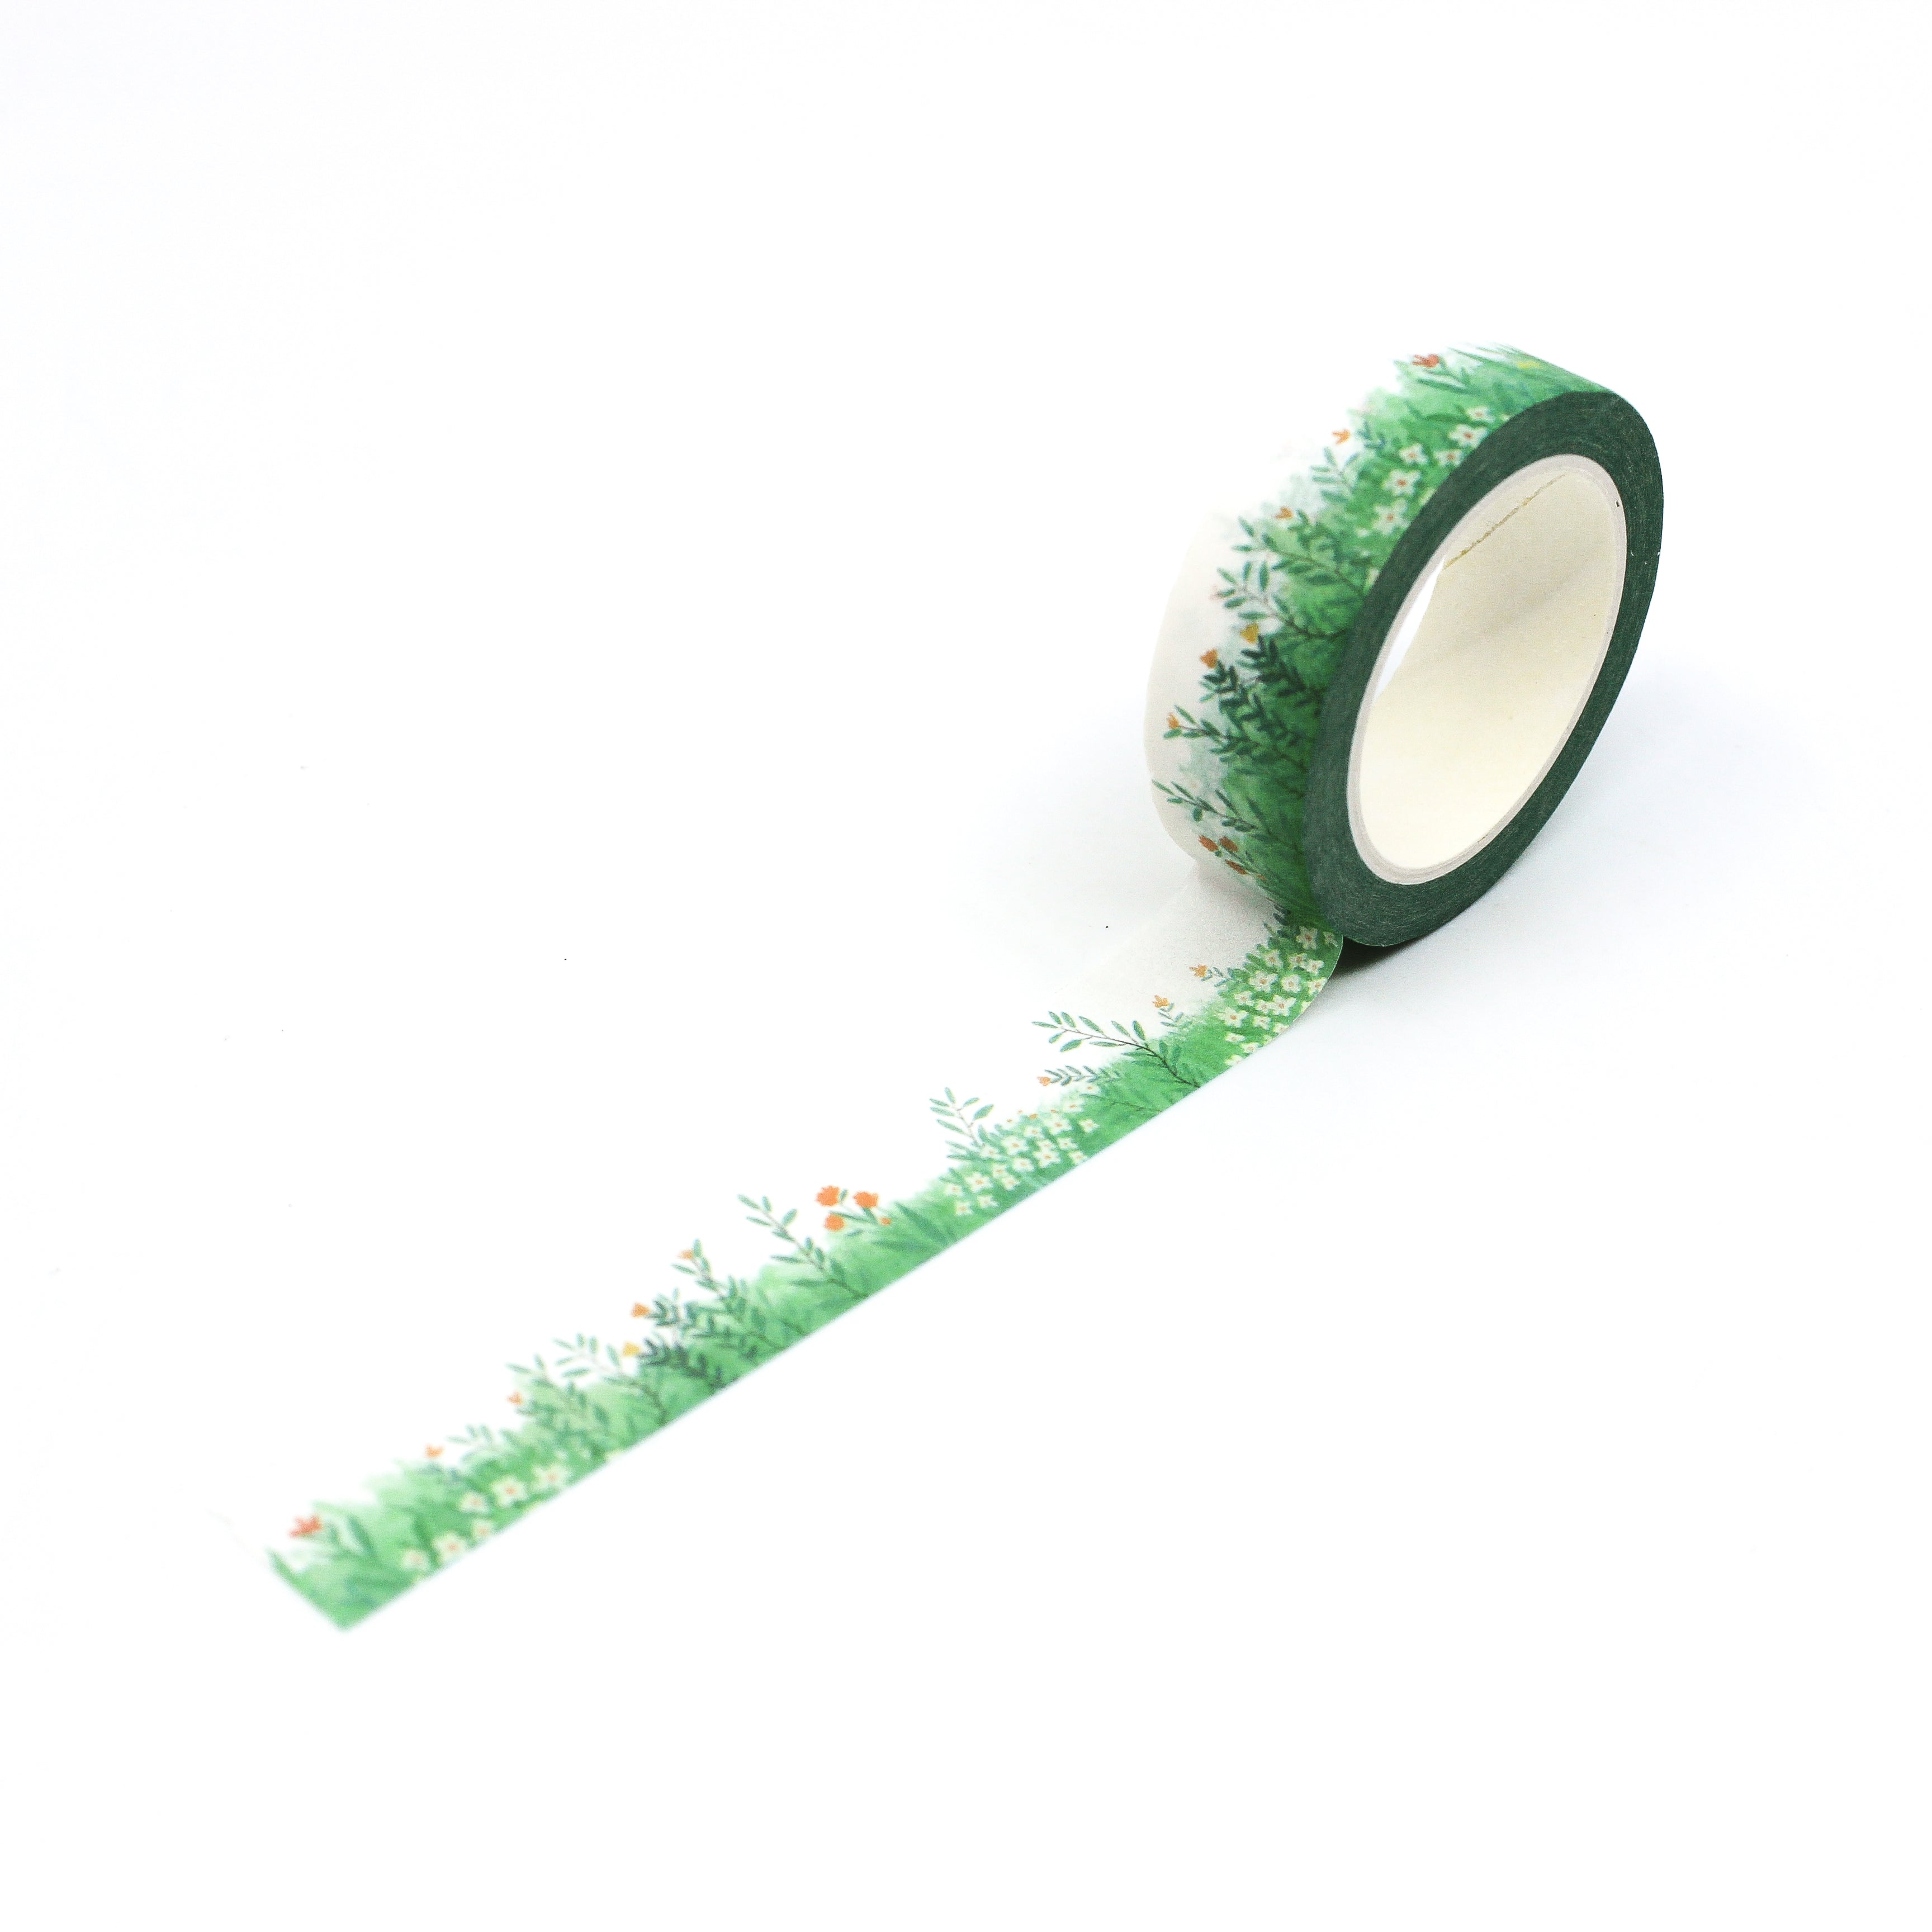 This is a full pattern repeat view of spring green grass washi tape from BBB Supplies Craft Shop